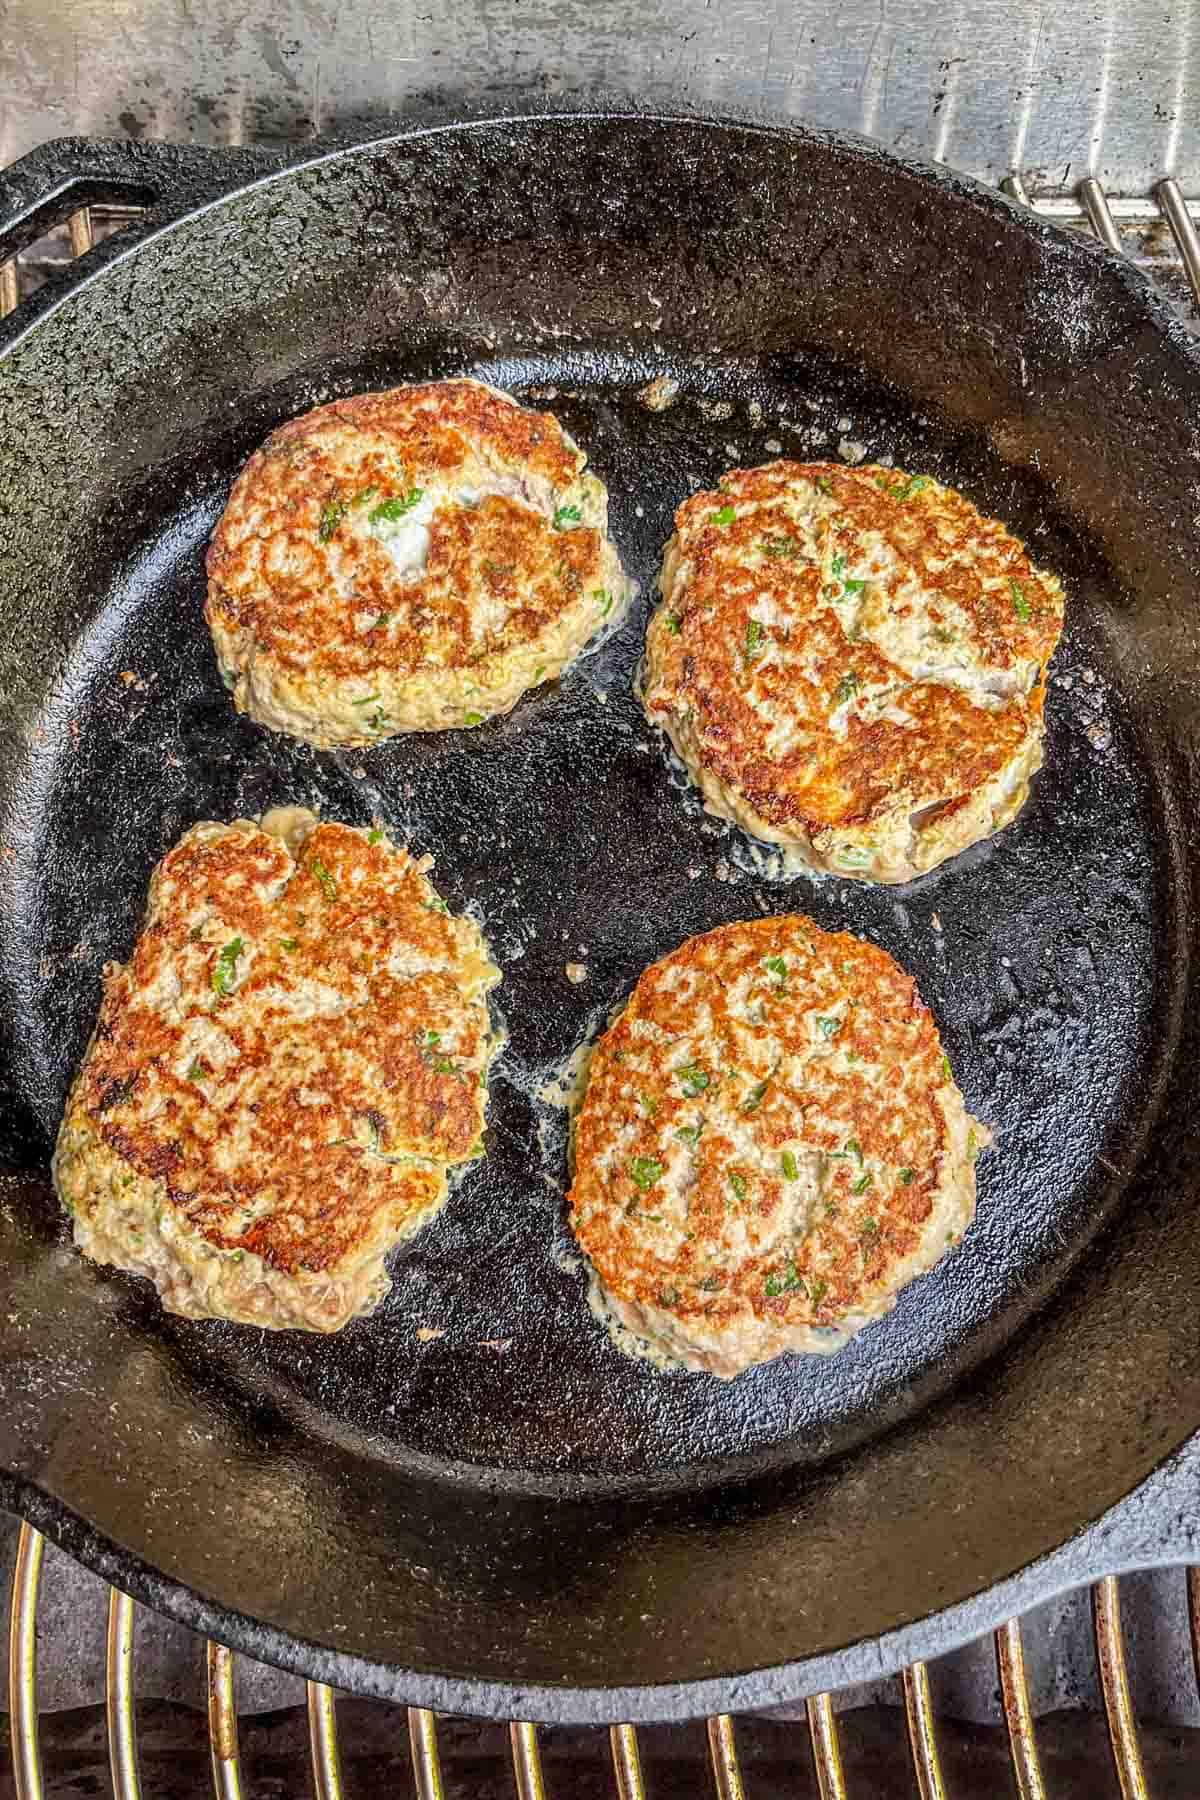 Four turkey burgers in a cast iron pan on a grill.